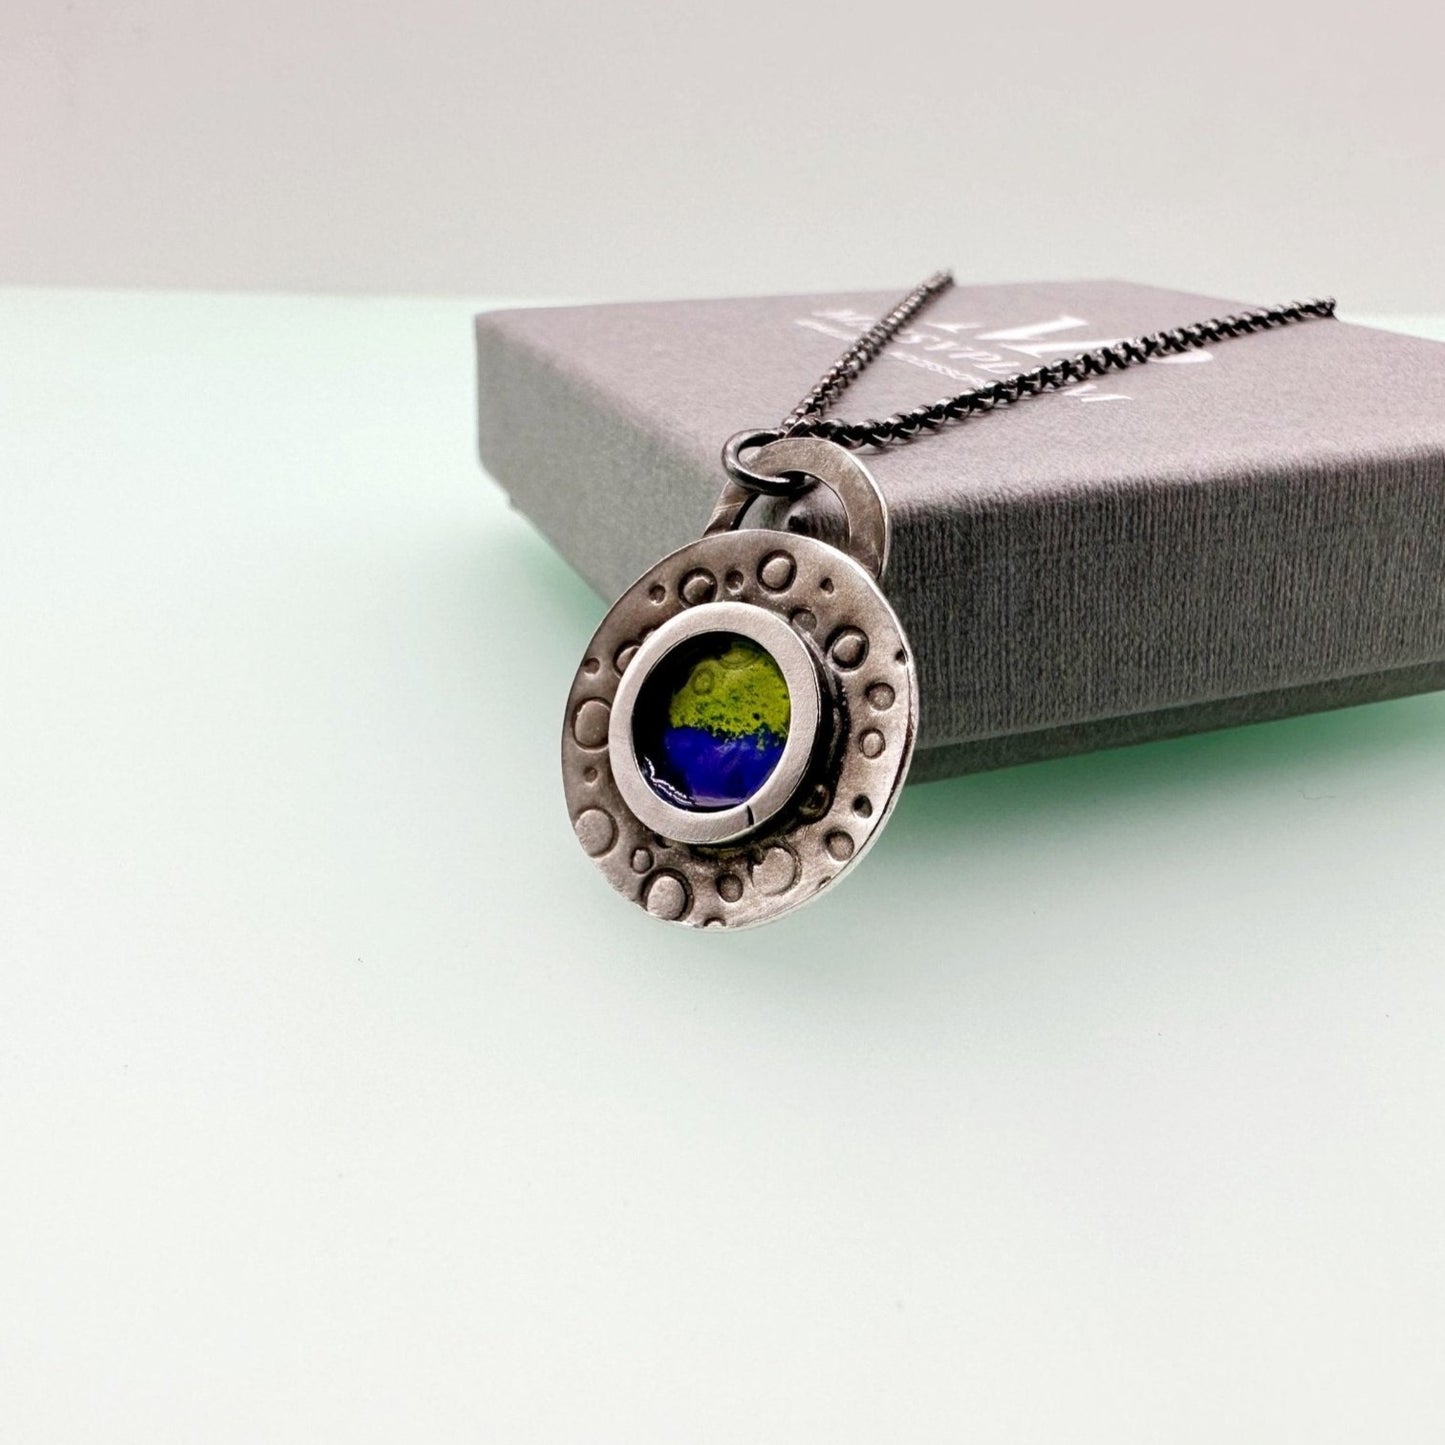 Round handstamped silver pendant with blue and green enamel